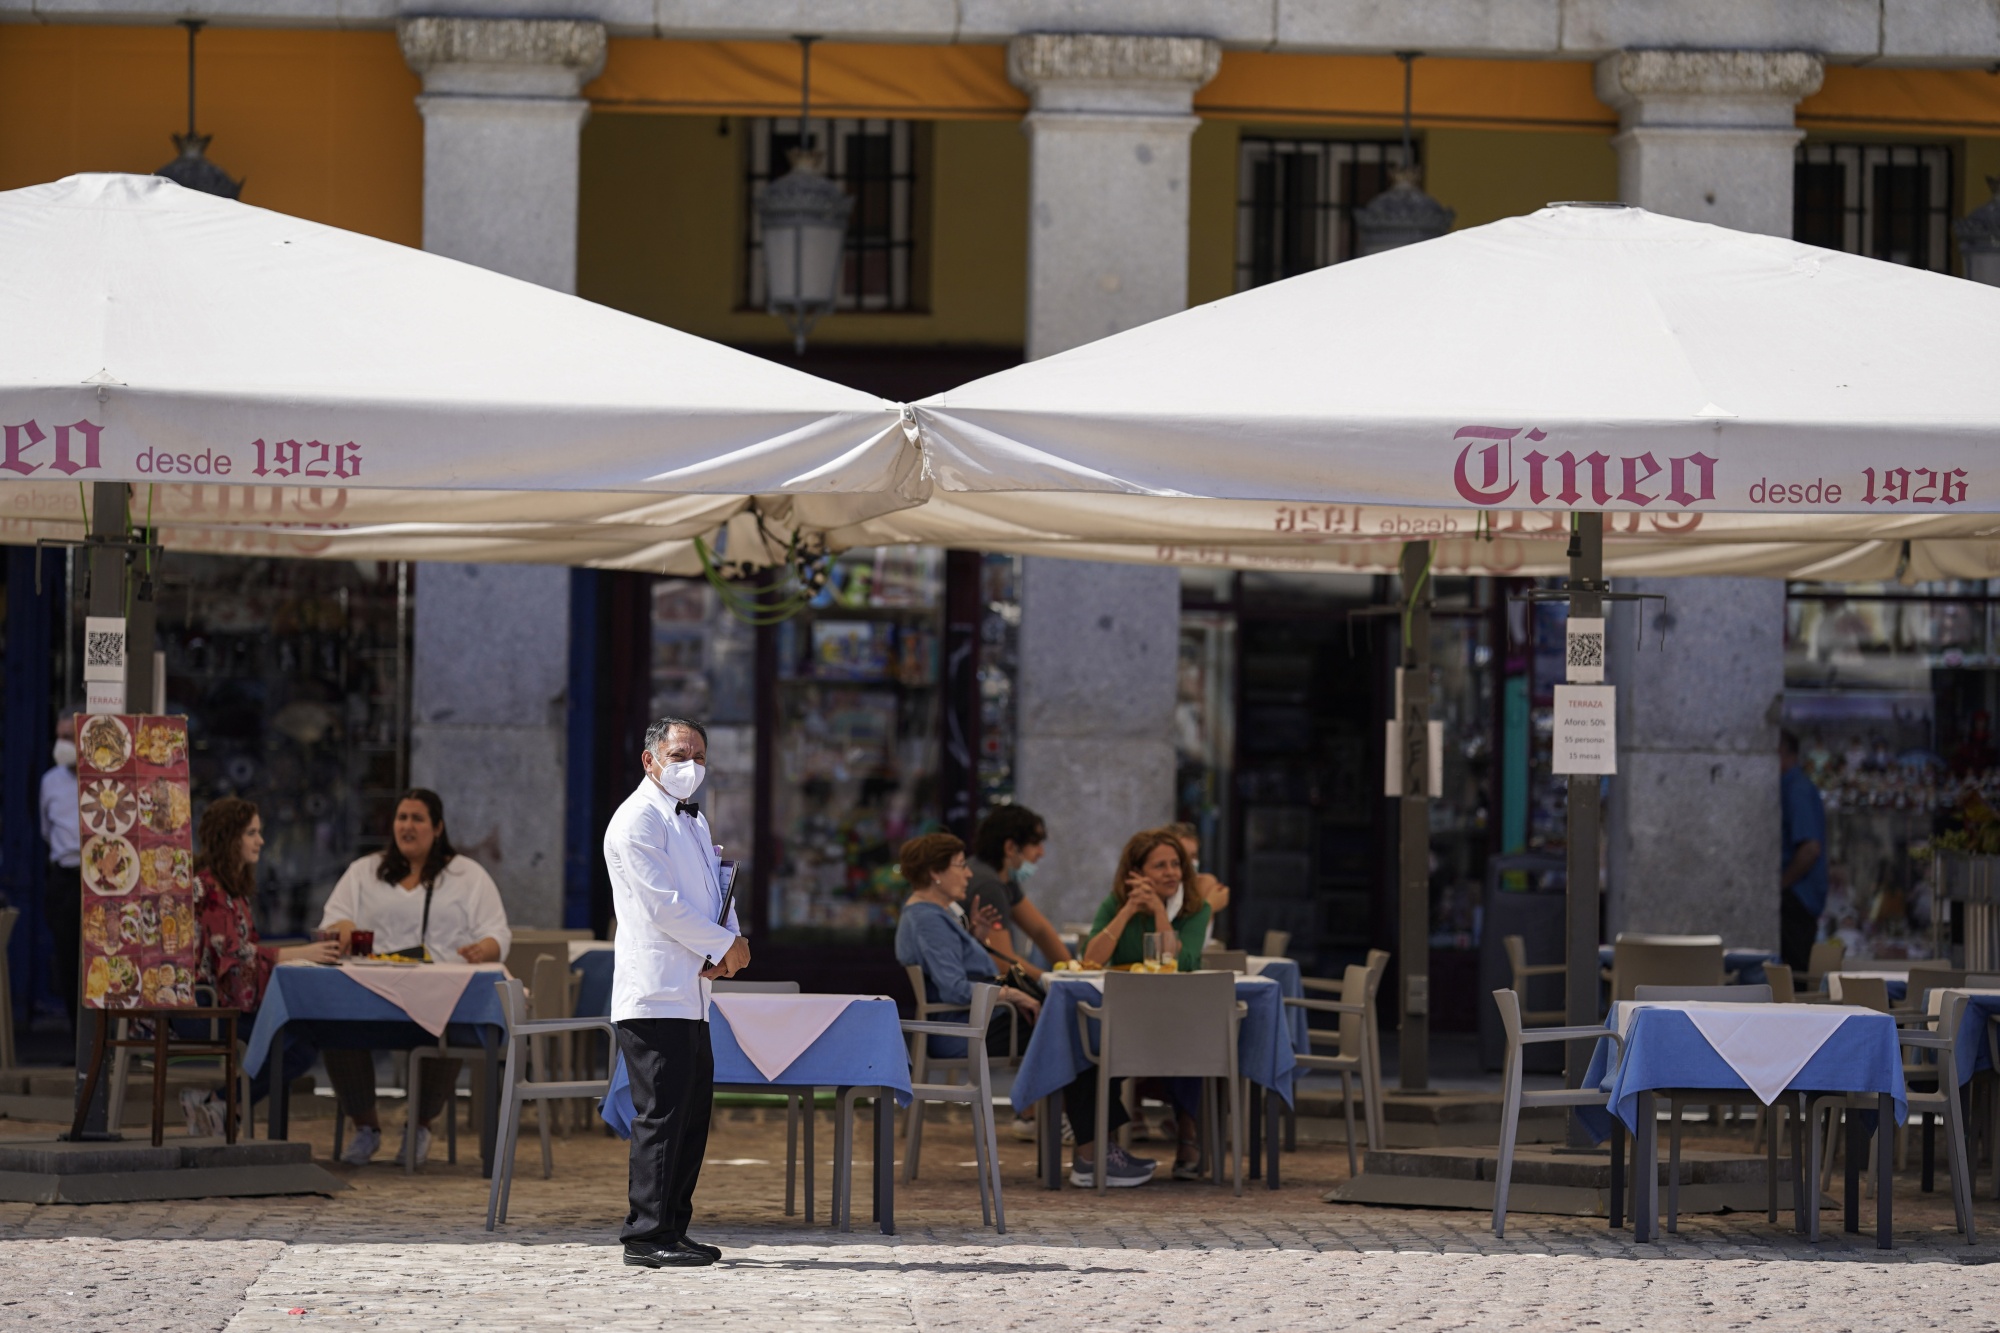 A waiter stands and waits for customers outside a restaurant on Plaza Mayor in Madrid, on Sept. 22.